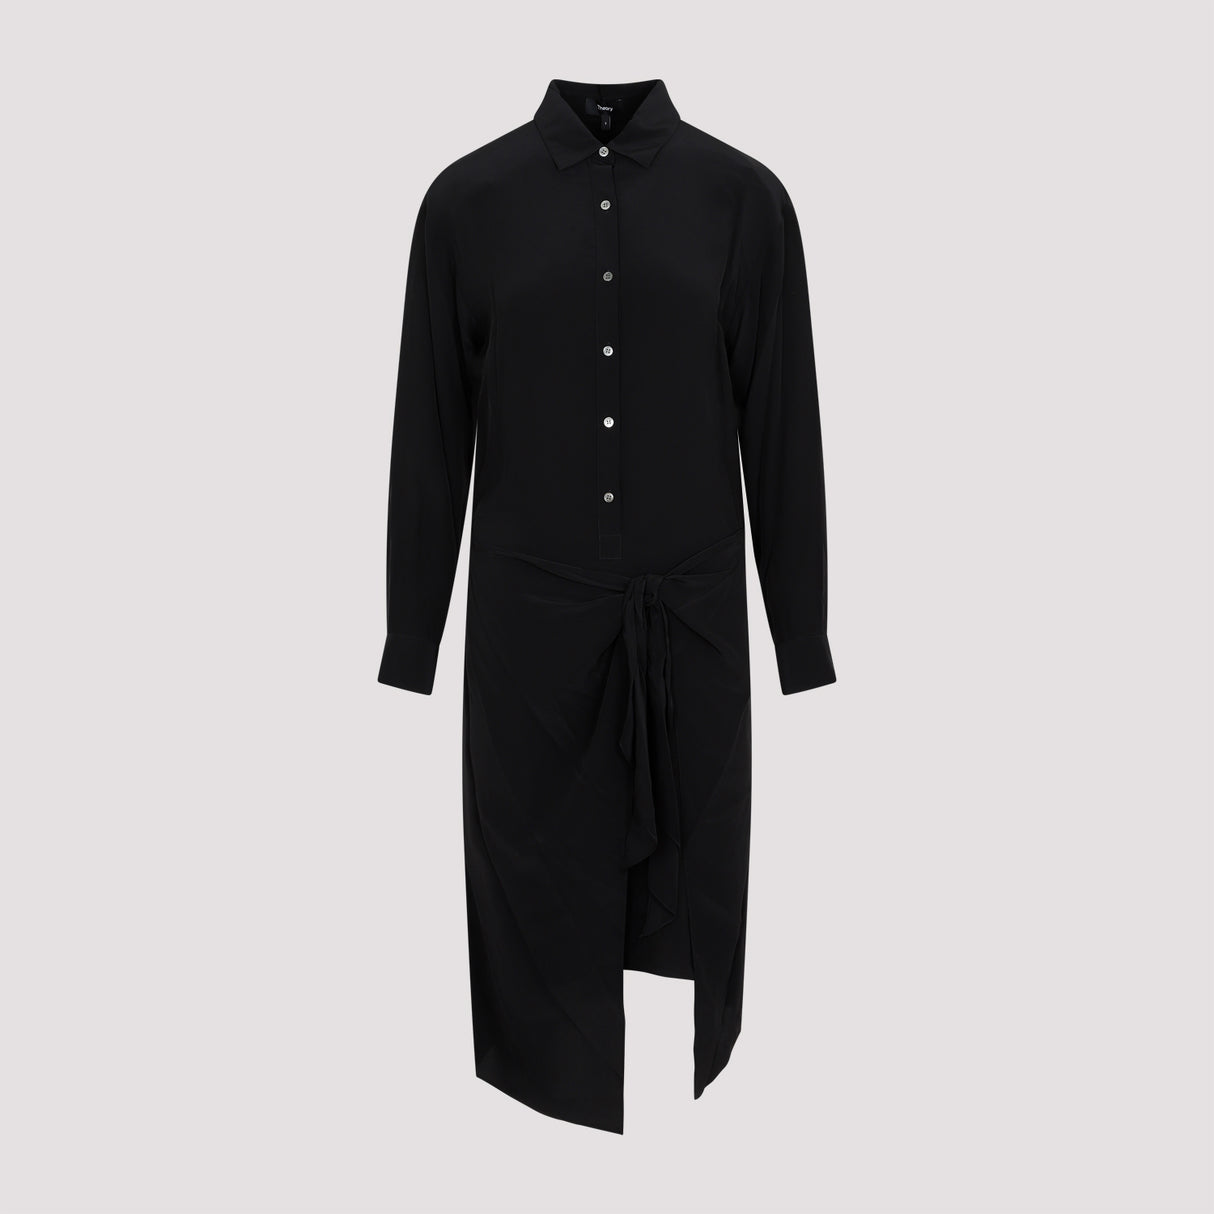 THEORY Stylish Black Sarong Shirt for Women - FW23 Collection